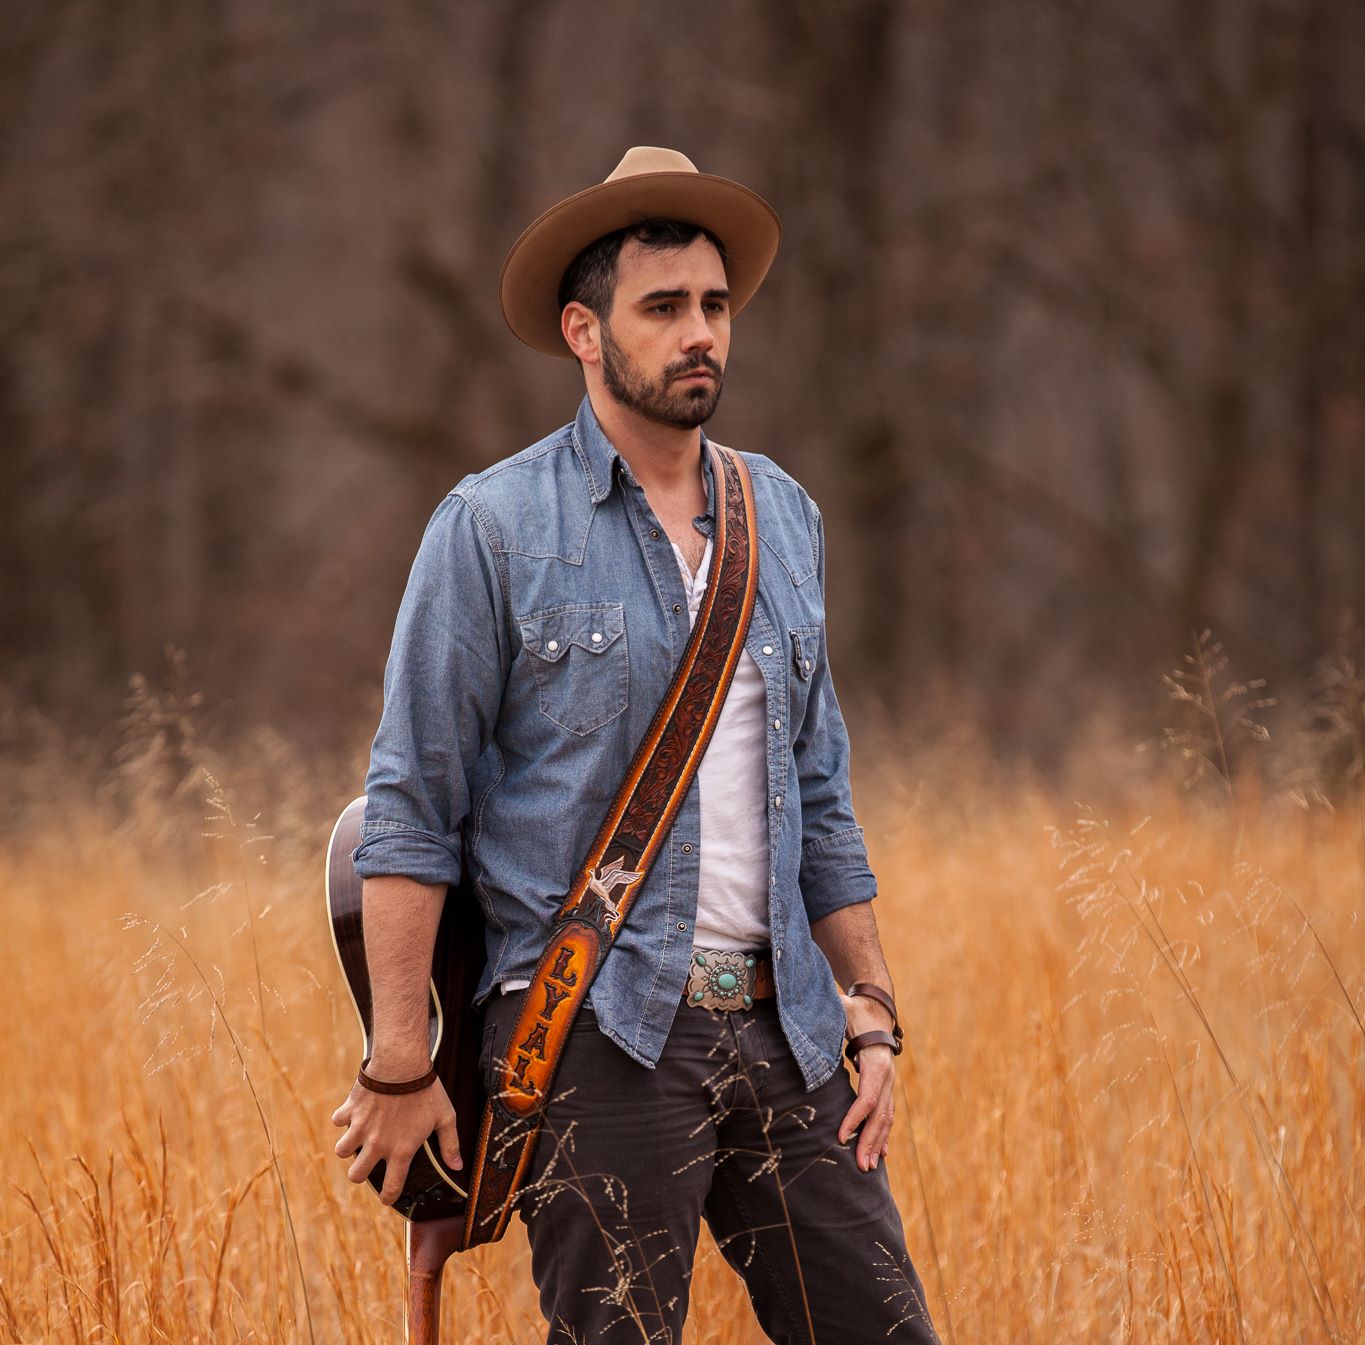 A man in a cowboy hat, wearing a guitar, poses for a photo in a field